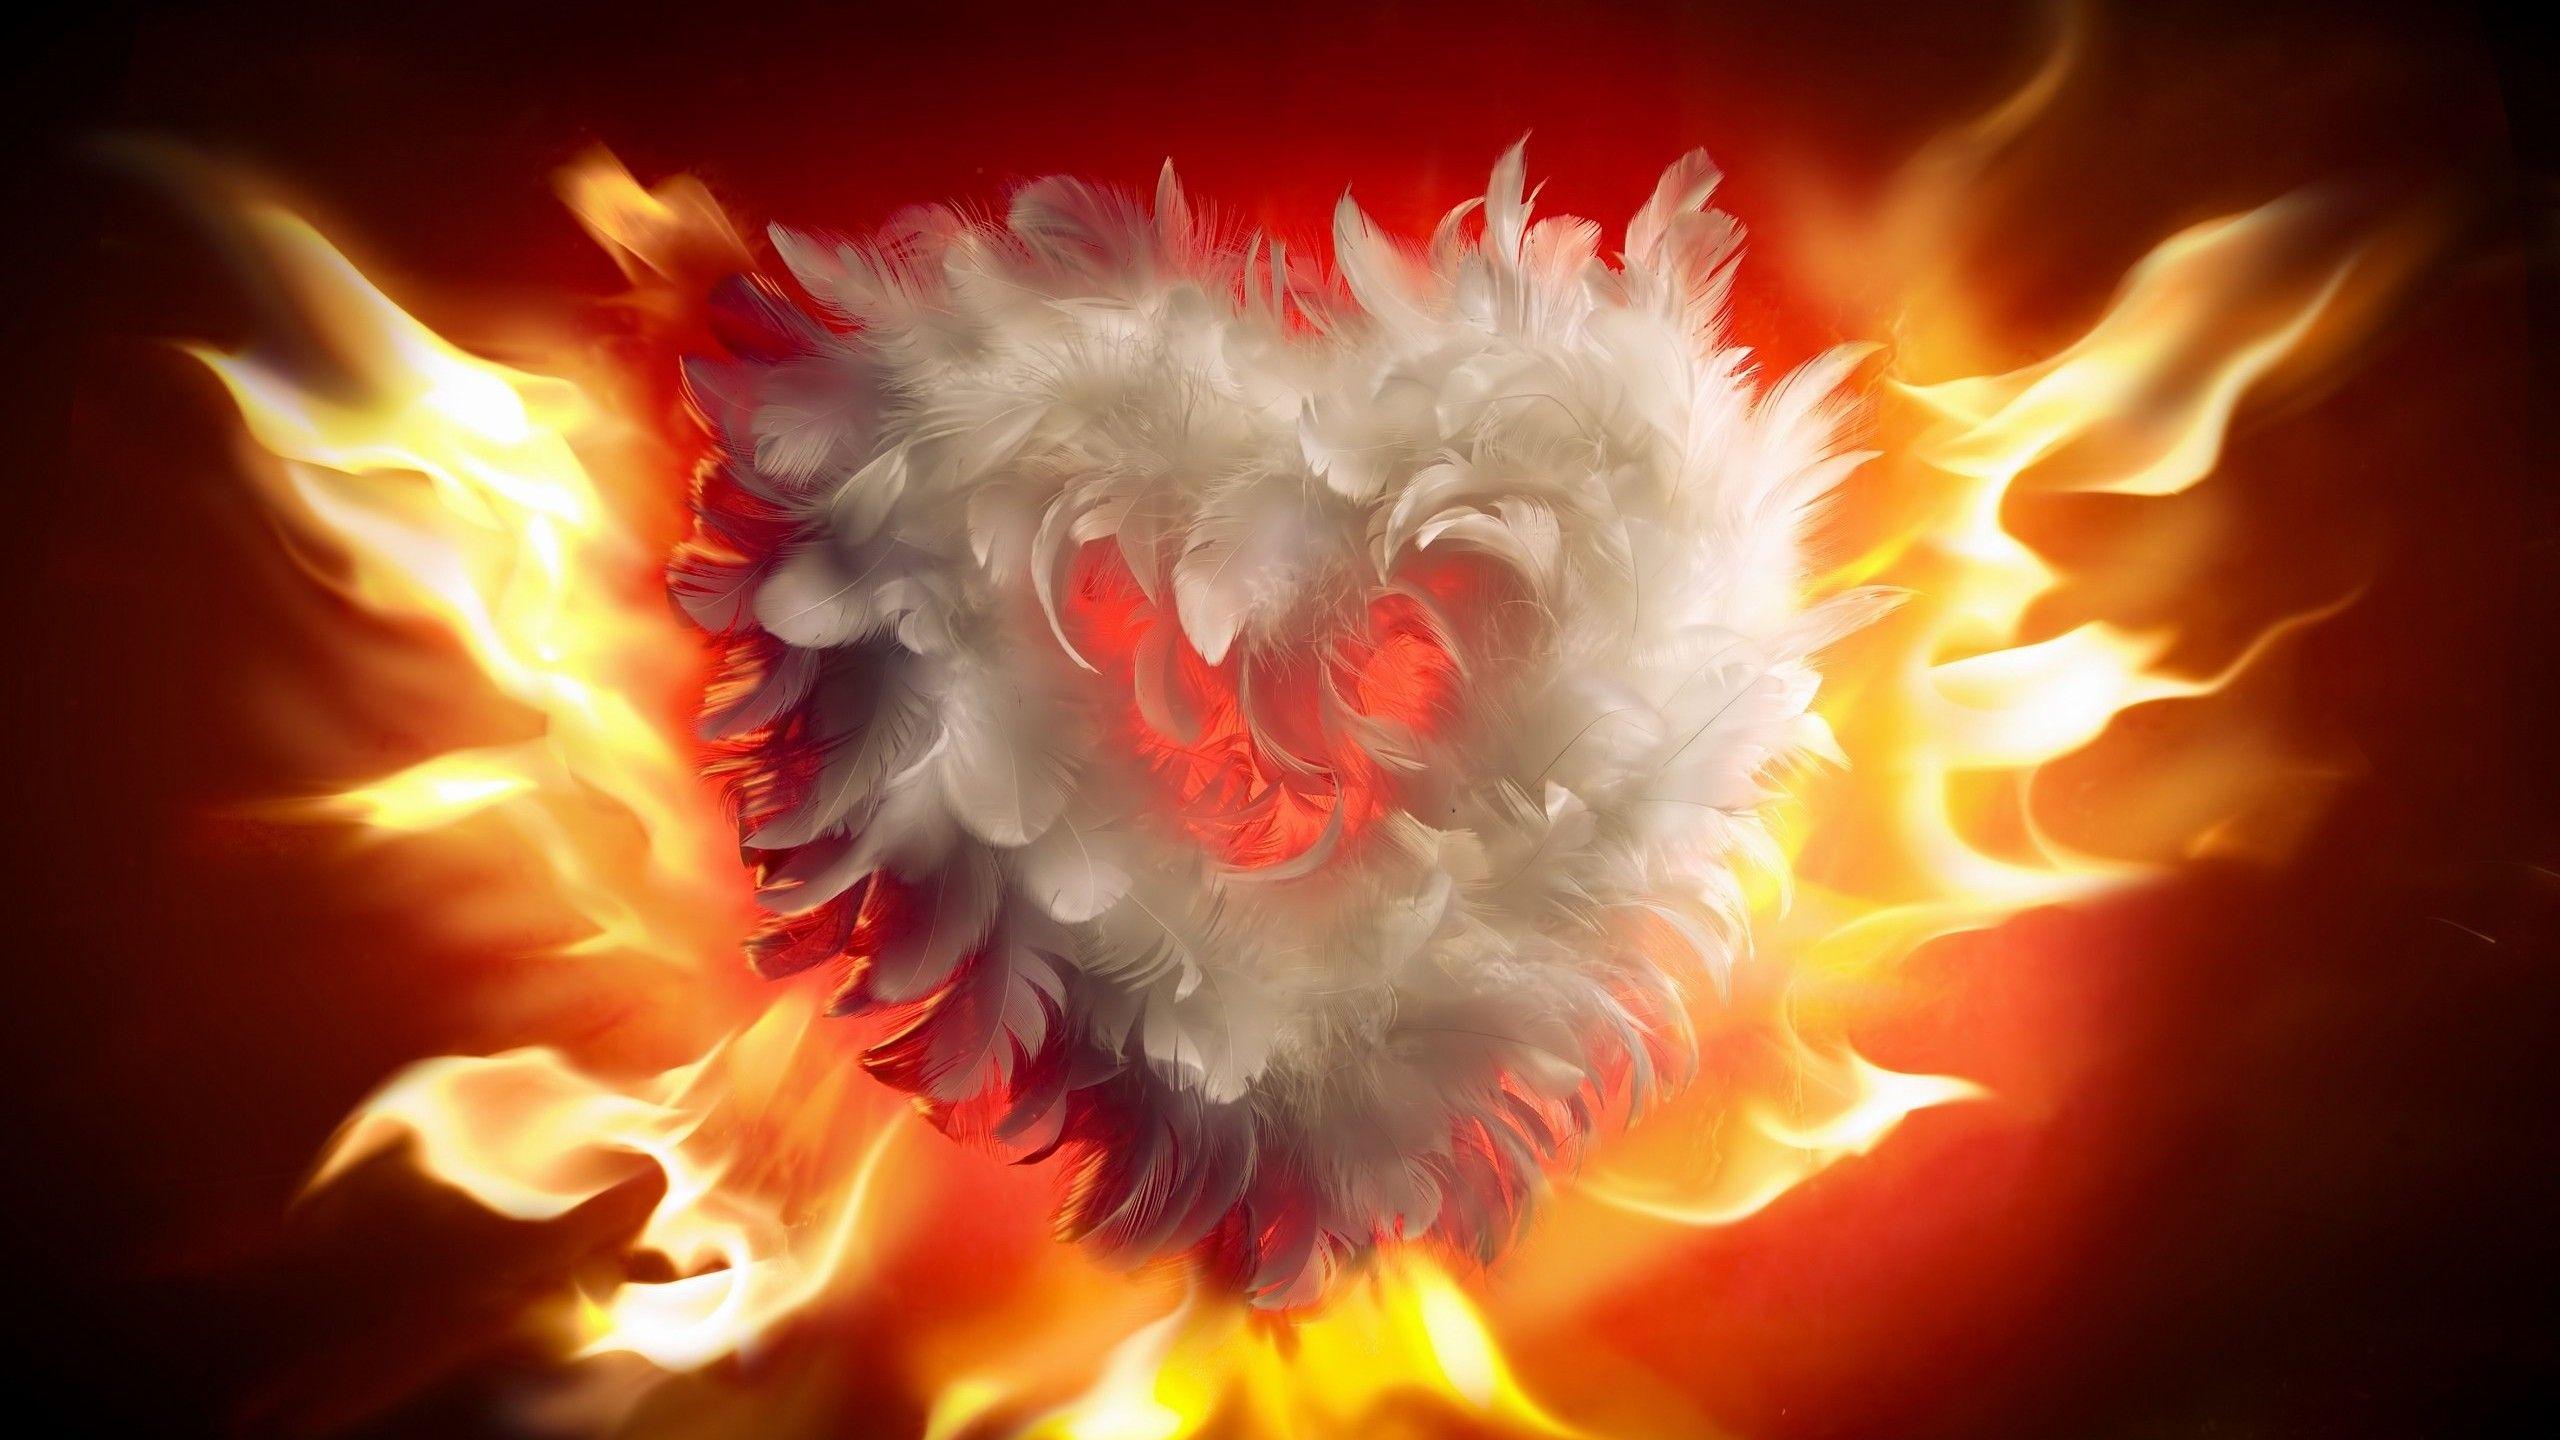 Download 2560x1440 Heart, Feathers, Fire, Romance, Artwork, #COOL